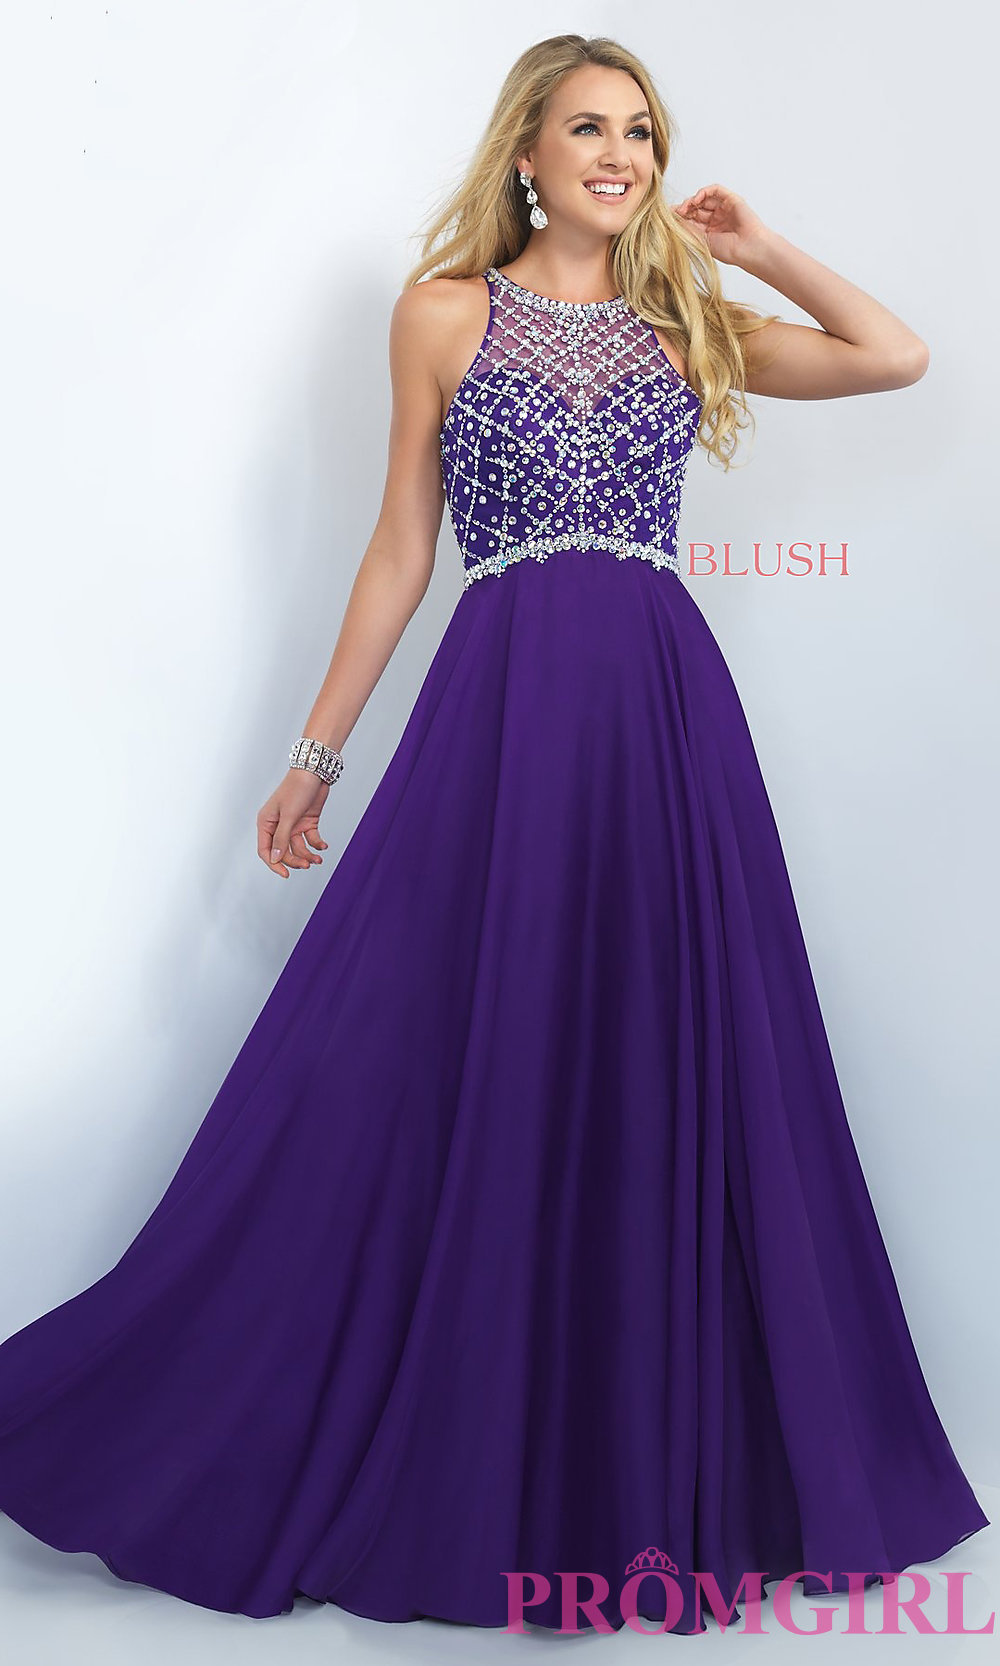 purple prom dresses hover to zoom GEUPXBN